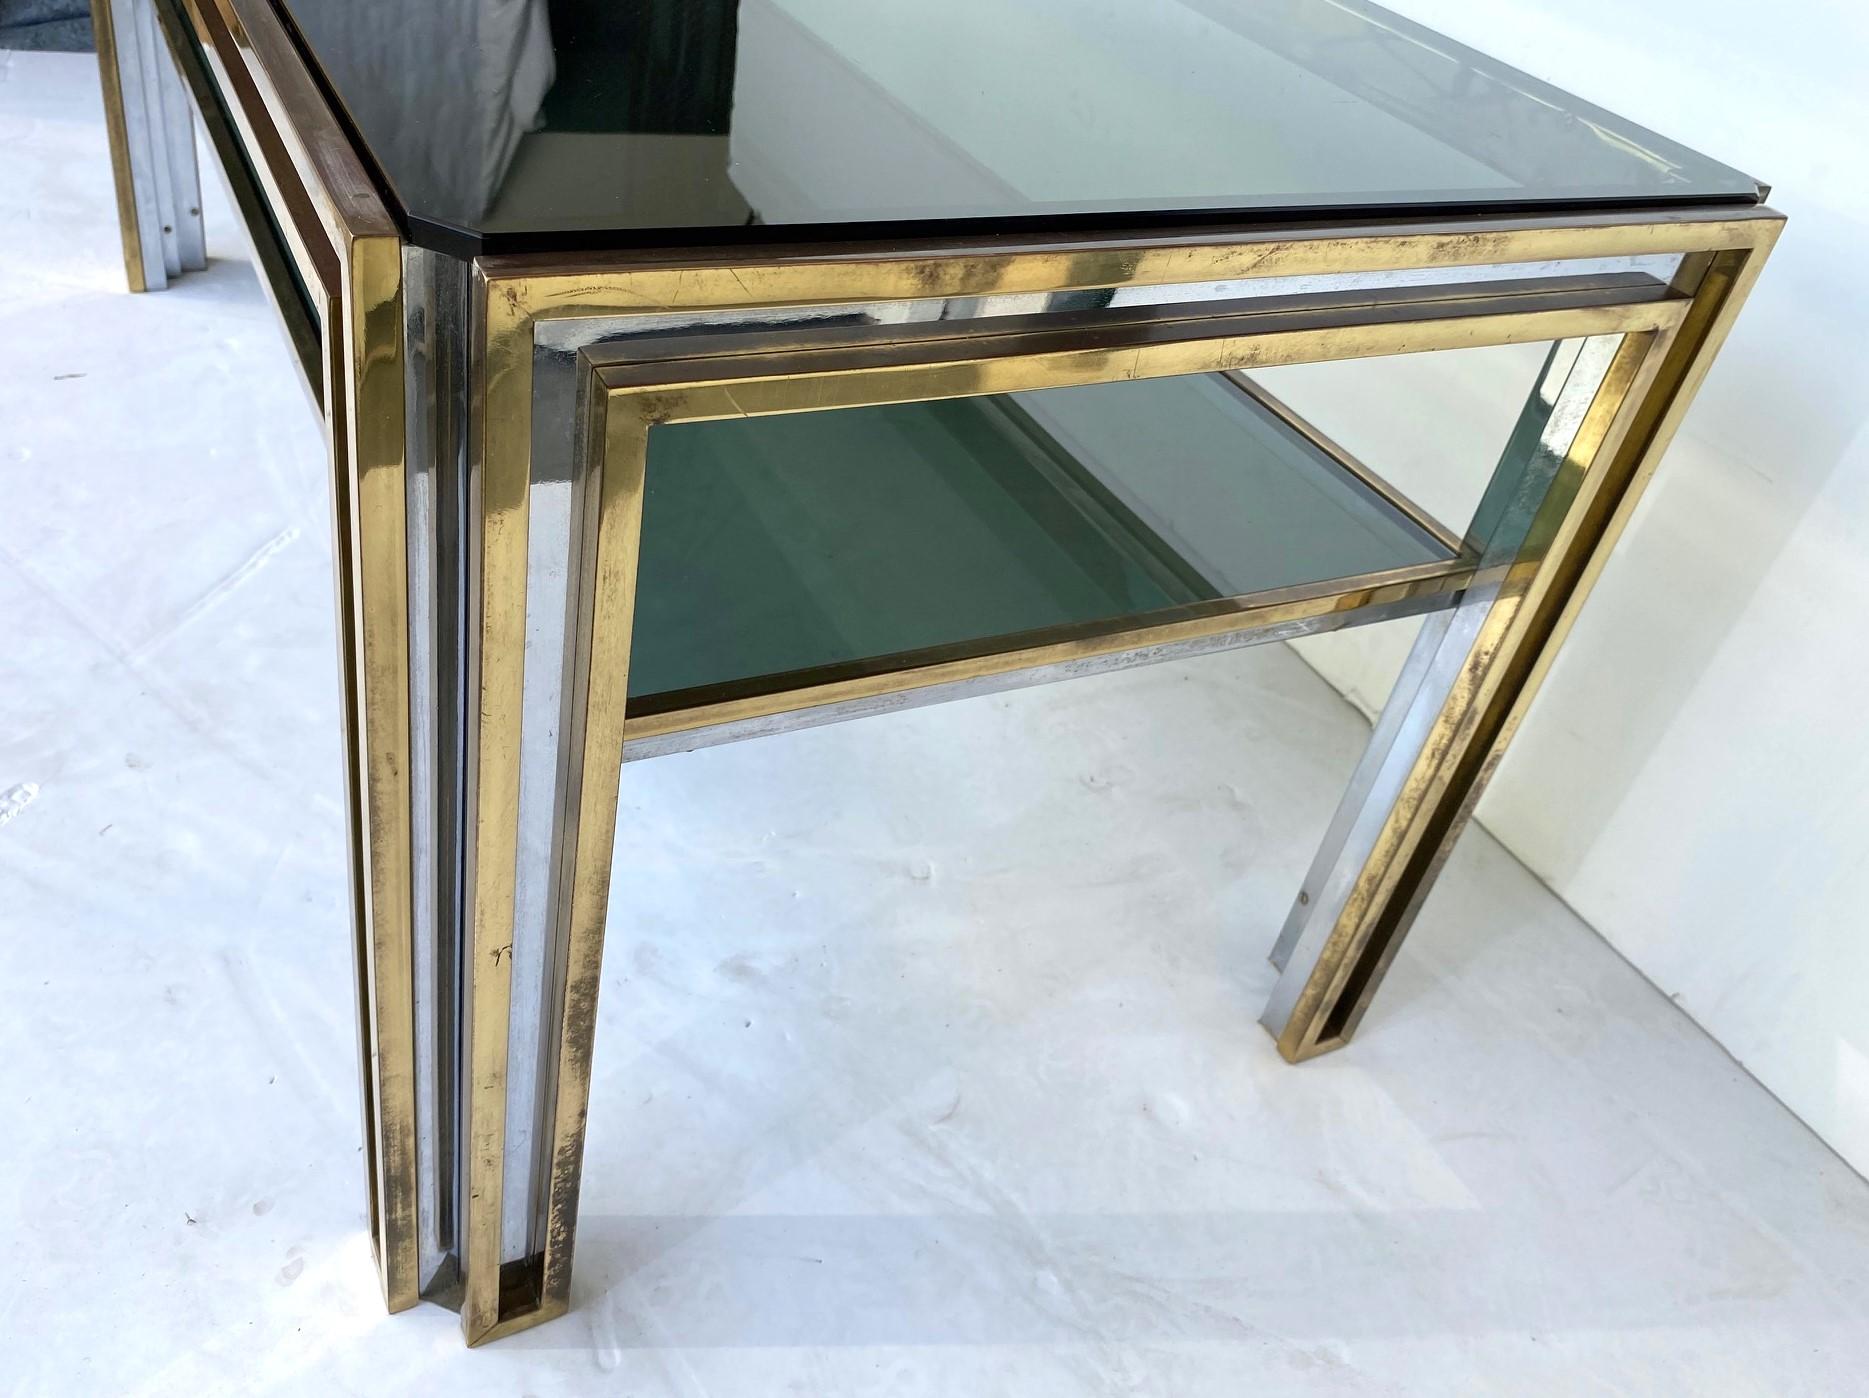 An Italian 2-tier chrome and brass coffee table with tinted glass.